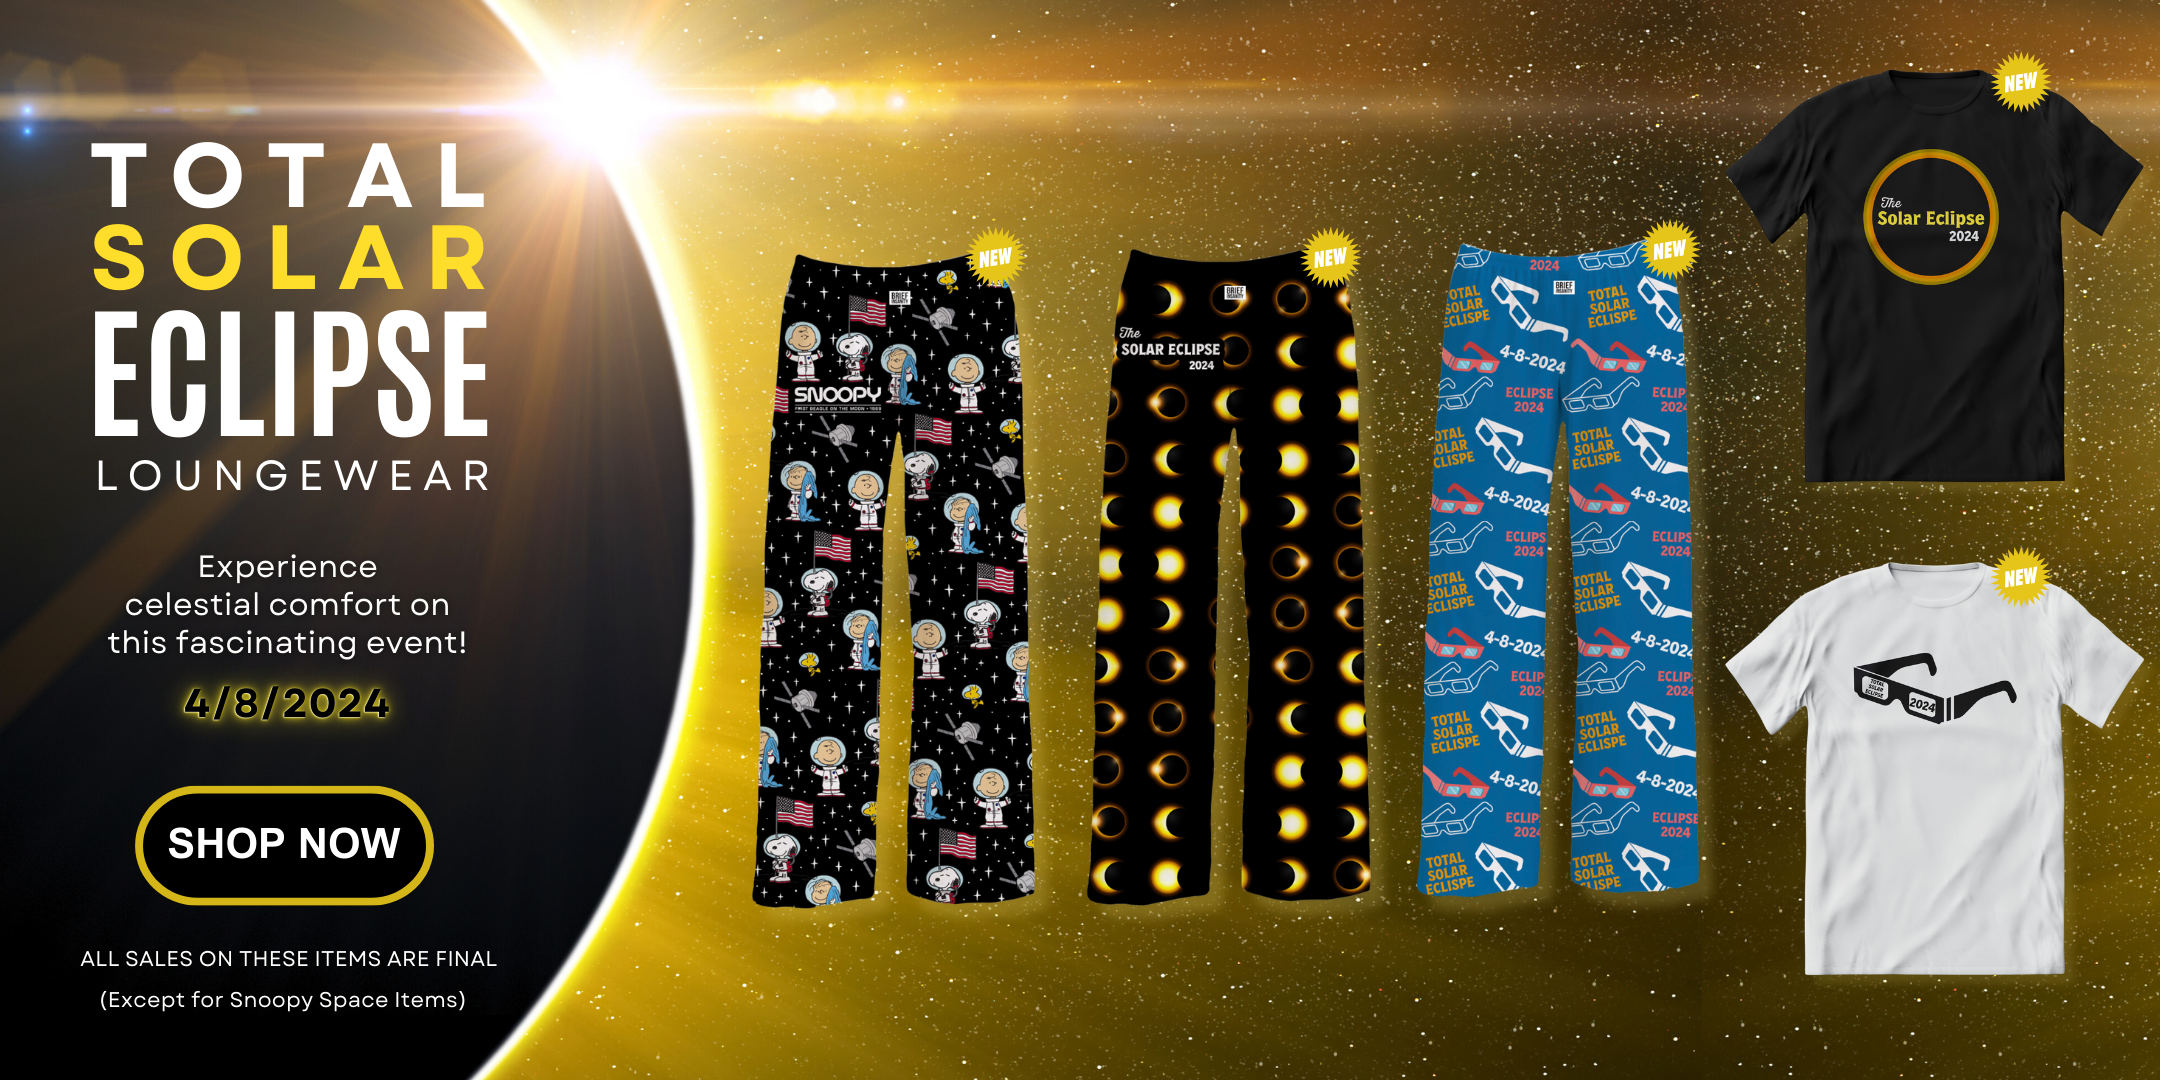 Total Solar Eclipse Loungewear, Experience celestial comfort on this fascinating event! 4/8/2024 SHOP NOW All sales on these items are final (except for Snoopy Space items)